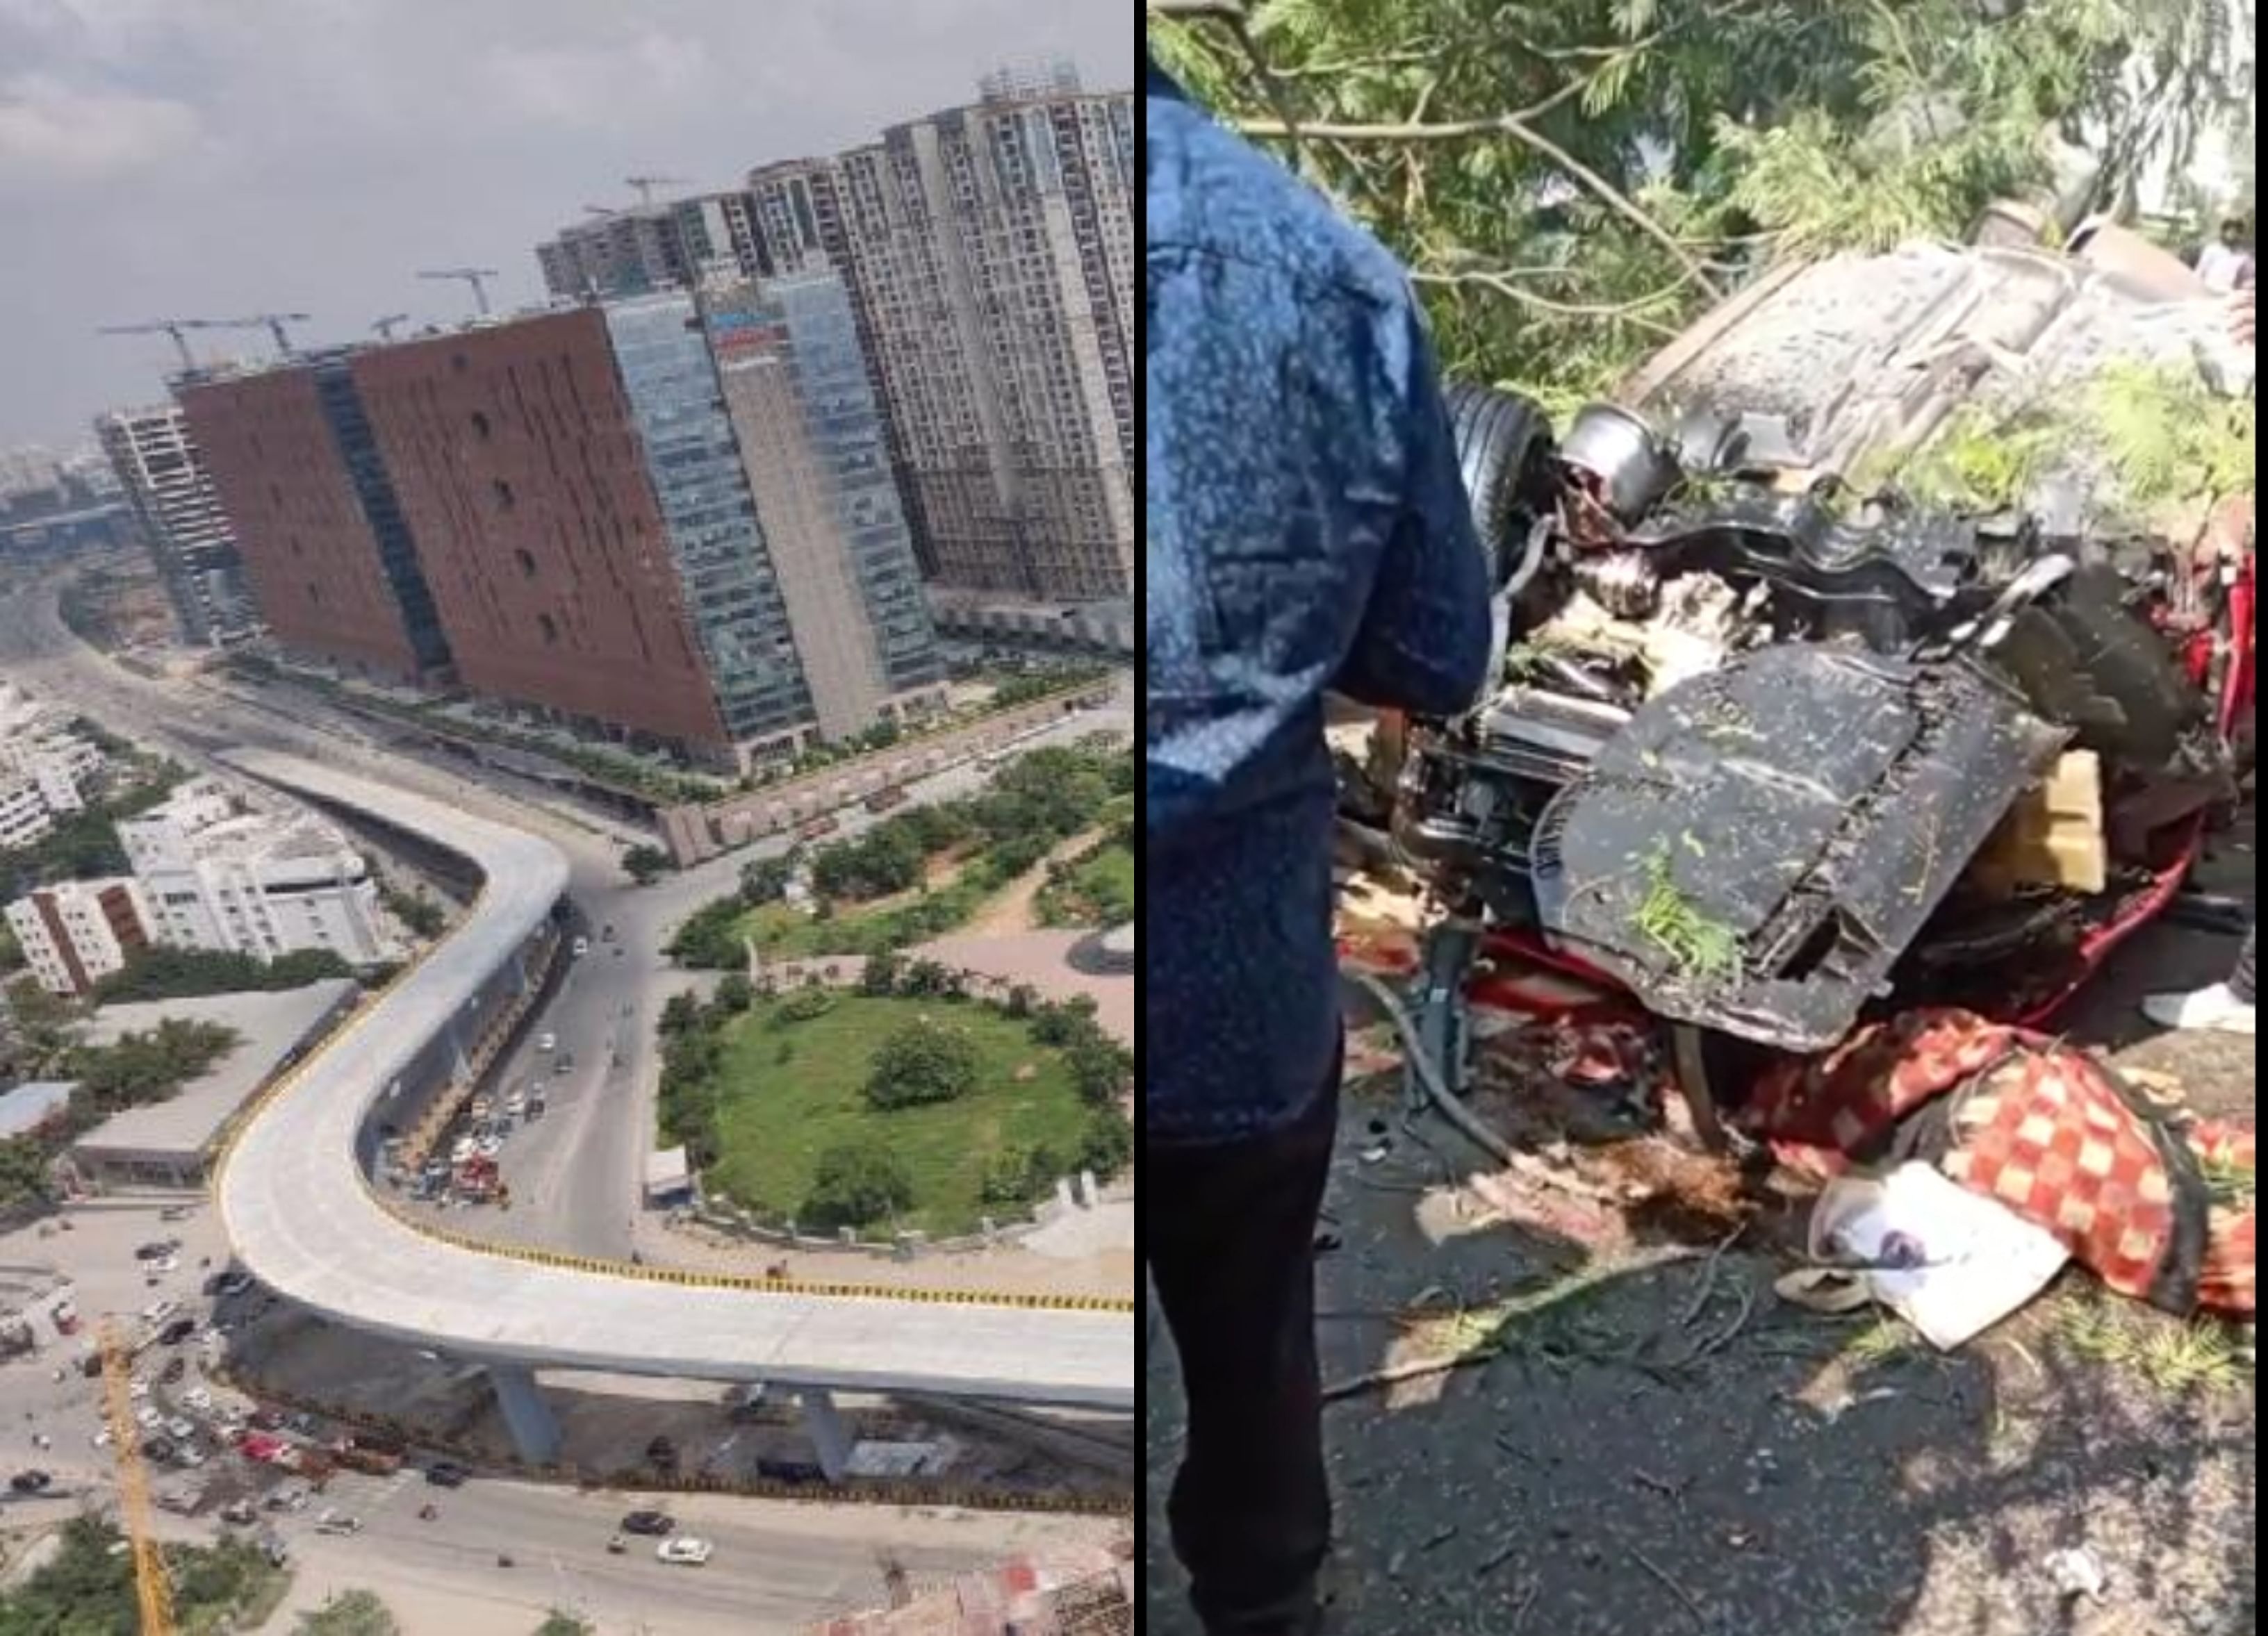 Police said the car was zipping past at a speed between 100 and 120 km at the time of the accident. Police also believe that there is an engineering defect in the flyover design.